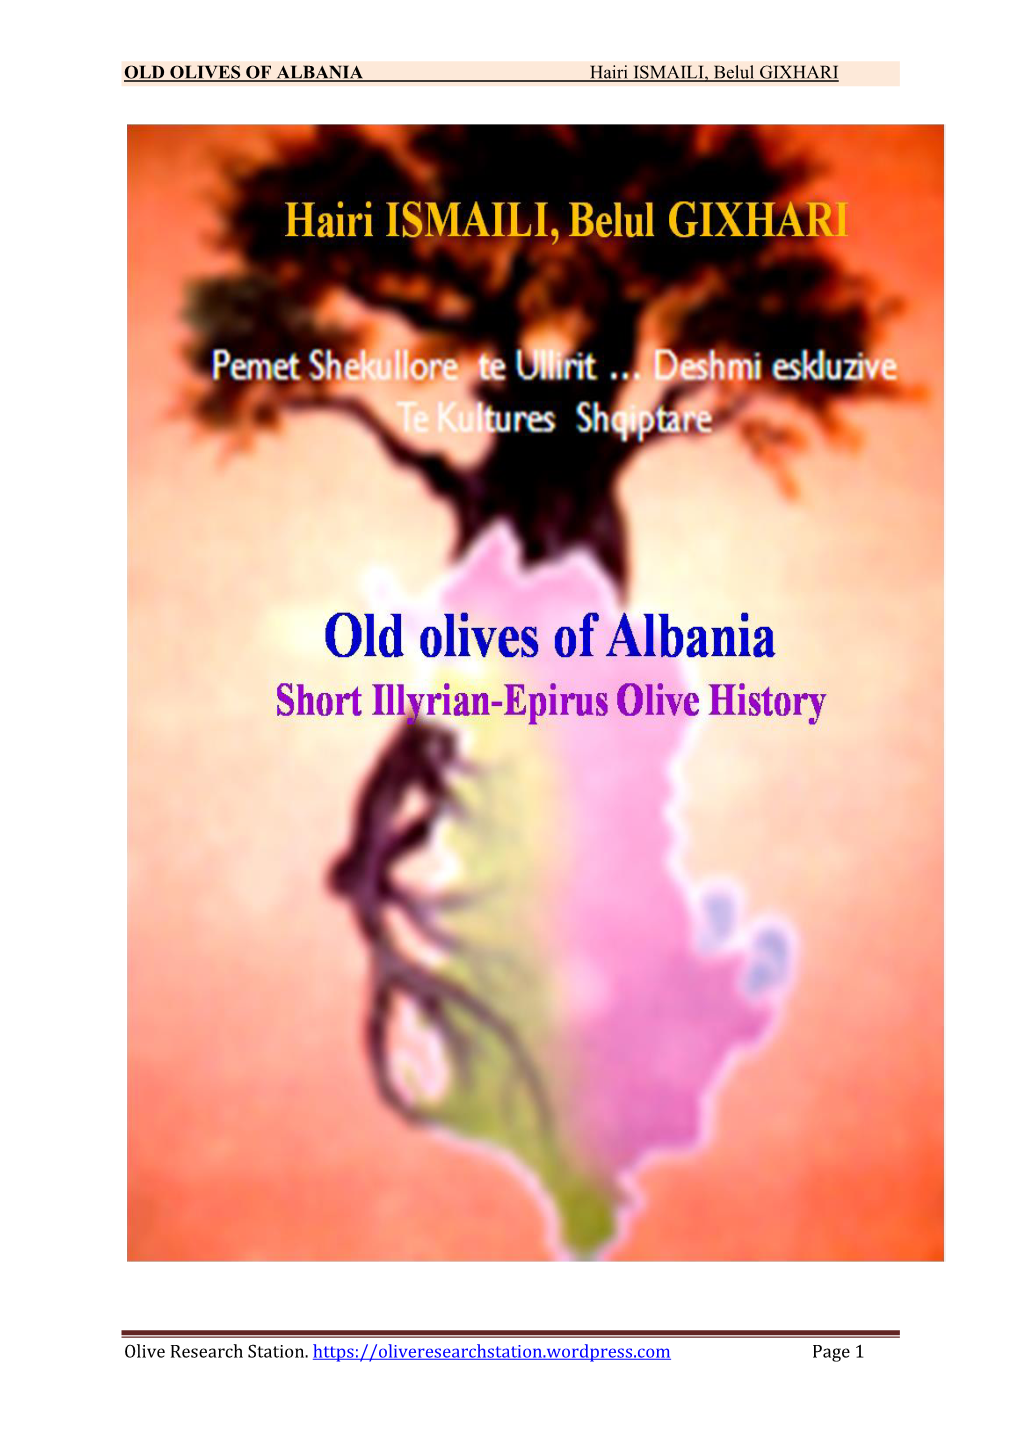 The Old Olives of Albania Short Illyrian